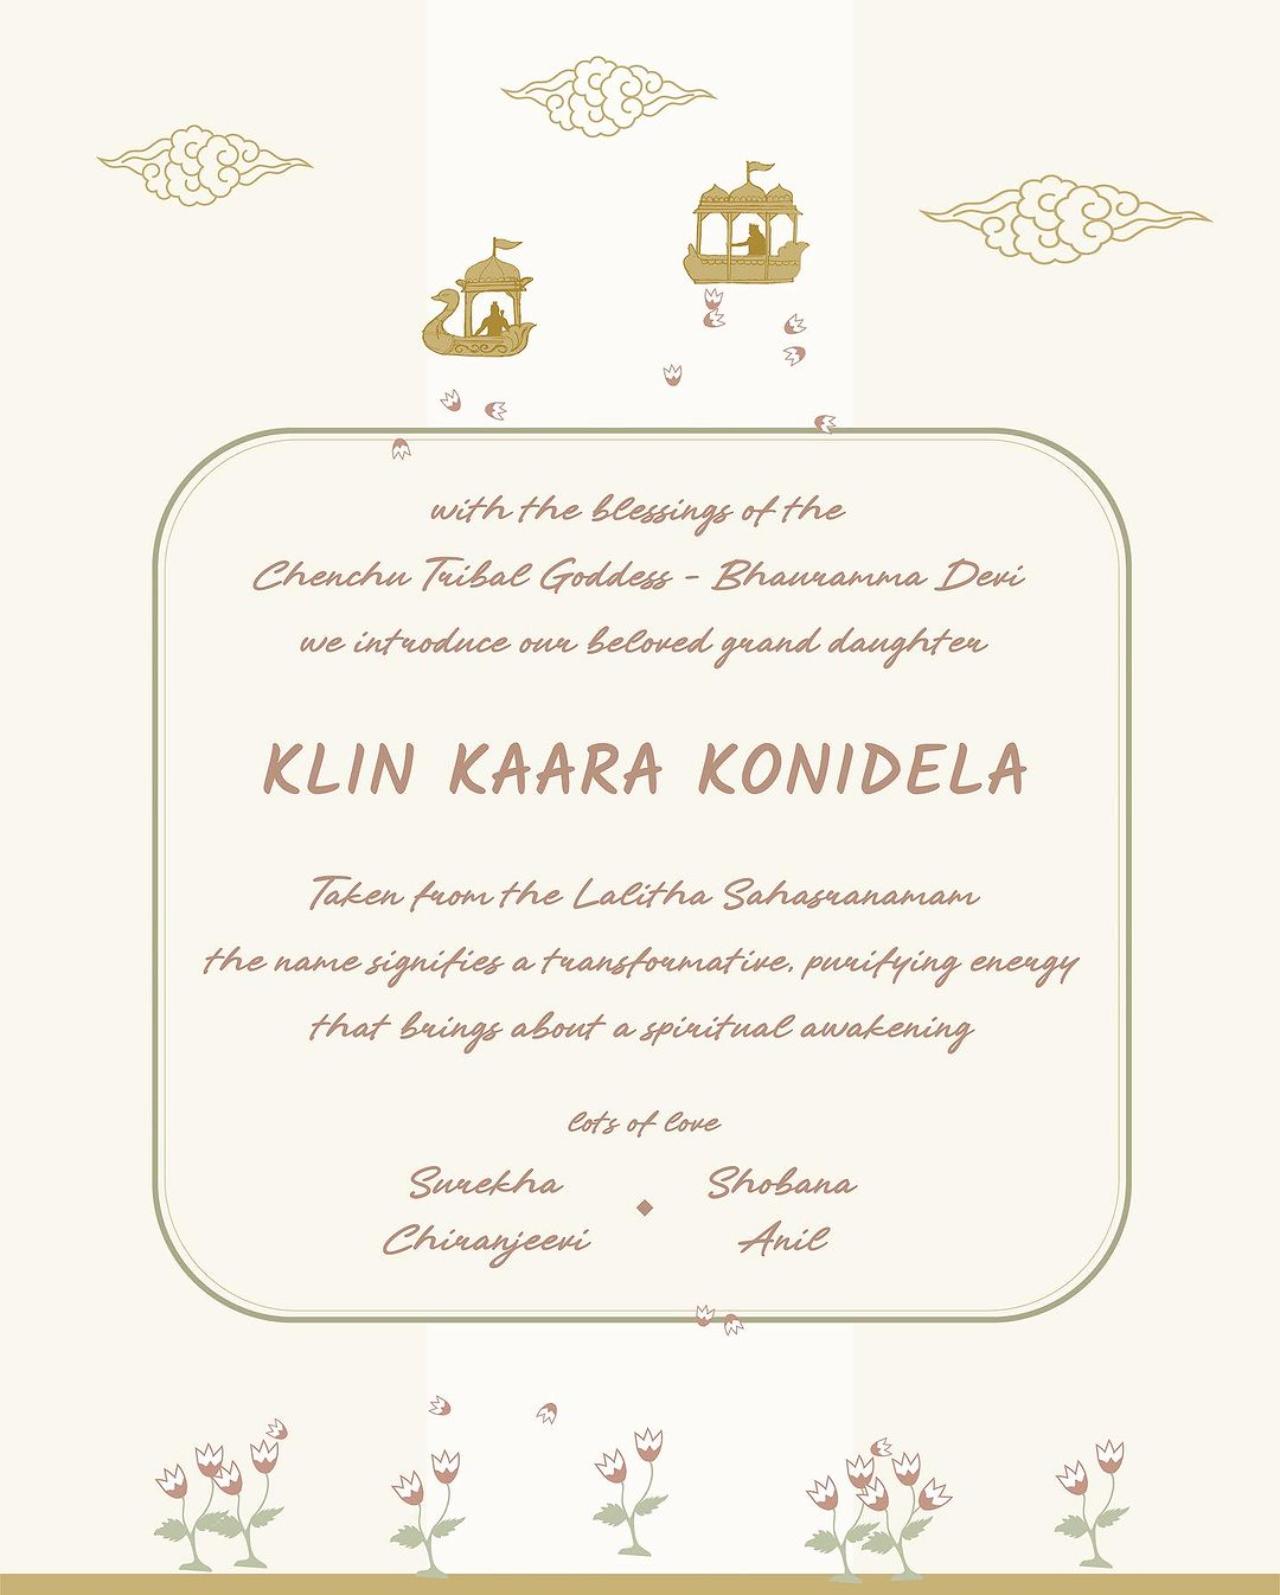 Ram Charan took to Instagram to officially announce the name of their daughter on behalf of both sets of her grandparents. “With the blessings of the Chenchu Tribal Goddess – Bhauramma Devi, we introduce our beloved granddaughter Klin Kaara Konidela.” The message also explained the meaning of the name – “Taken from the Lalitha Sahasranamam the name signifies a transformative, purifying energy that brings about a spiritual awakening,” he said